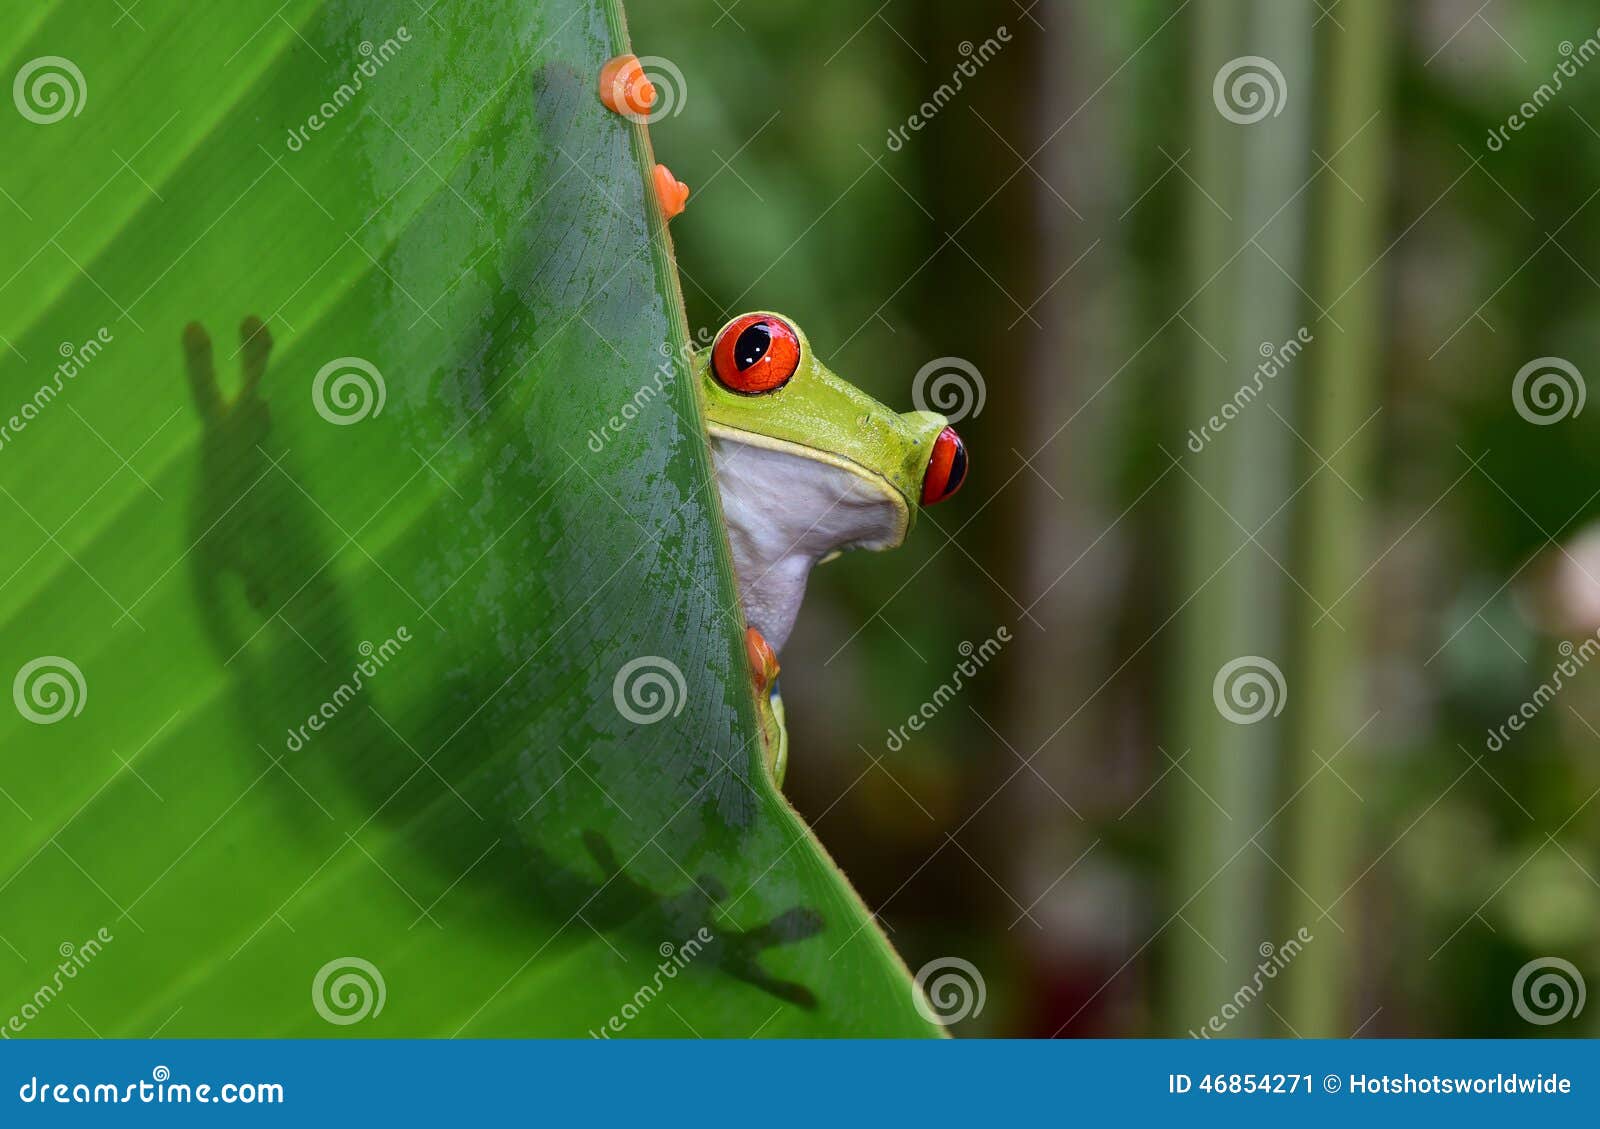 red eyed green tree frog, corcovado, costa rica